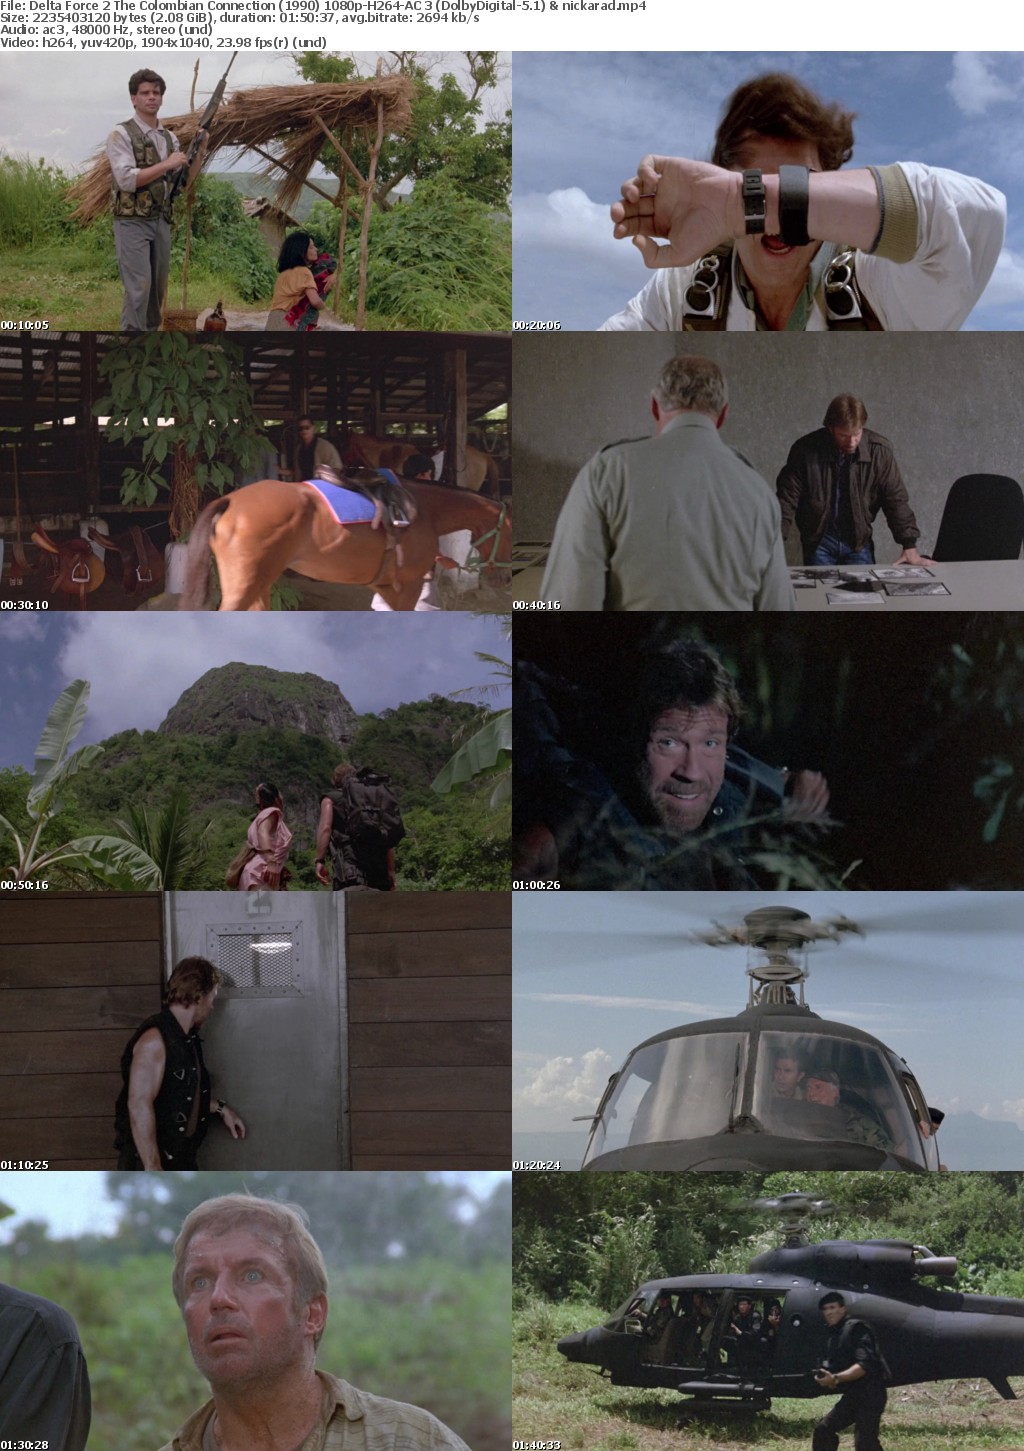 Delta Force 2 The Colombian Connection (1990)-Chuck Norris-1080p-H264-AC 3 (DolbyDigital-5 1) nickarad